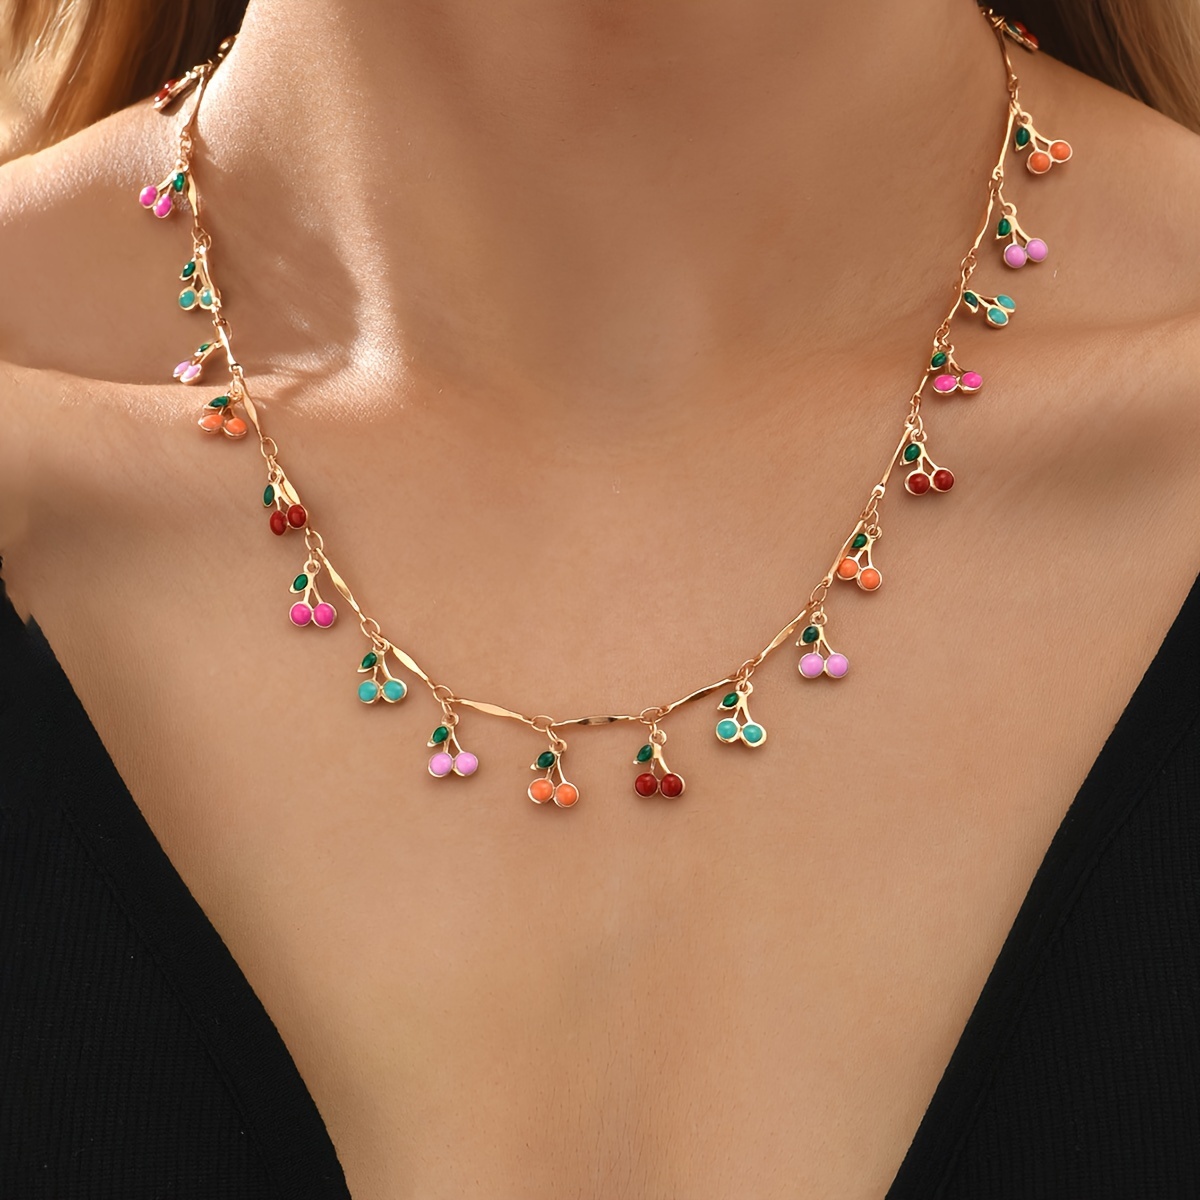 

1pc Exquisite And Stylish Cherry Beads Necklace, Perfect As A Gift For Birthdays Or Any Special Occasion